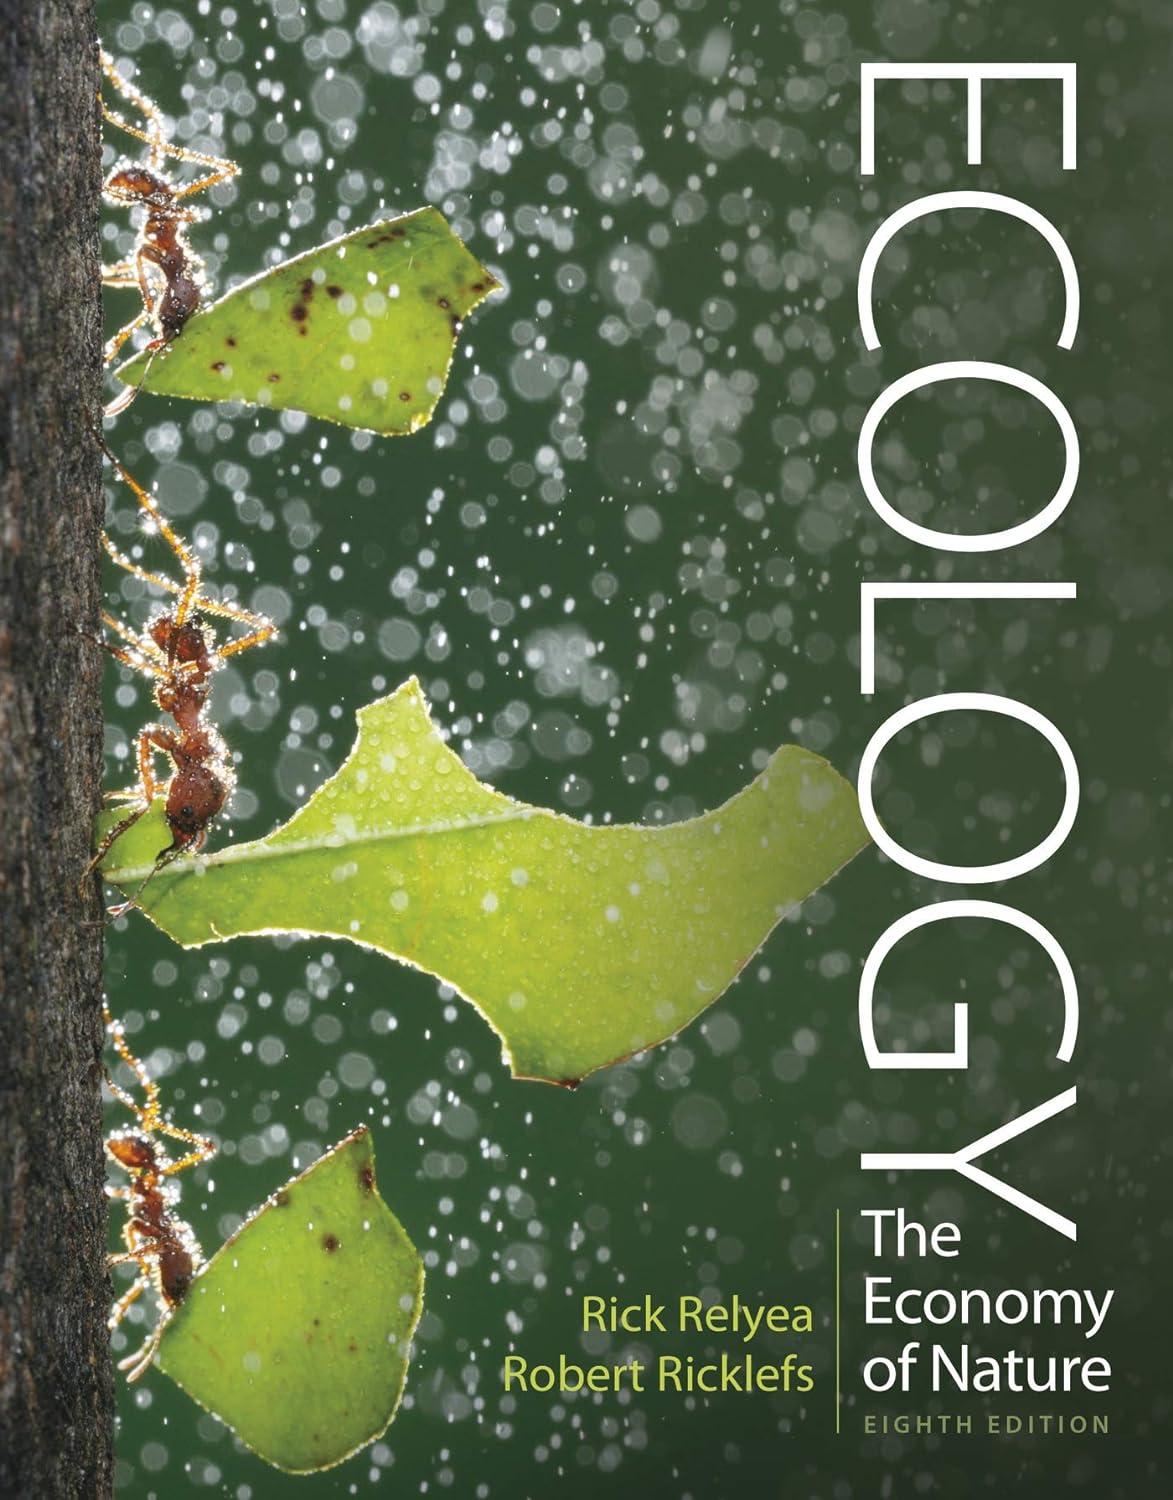 ecology the economy of nature 8th edition rick relyea, robert e. ricklefs 1319282687, 978-1319282684